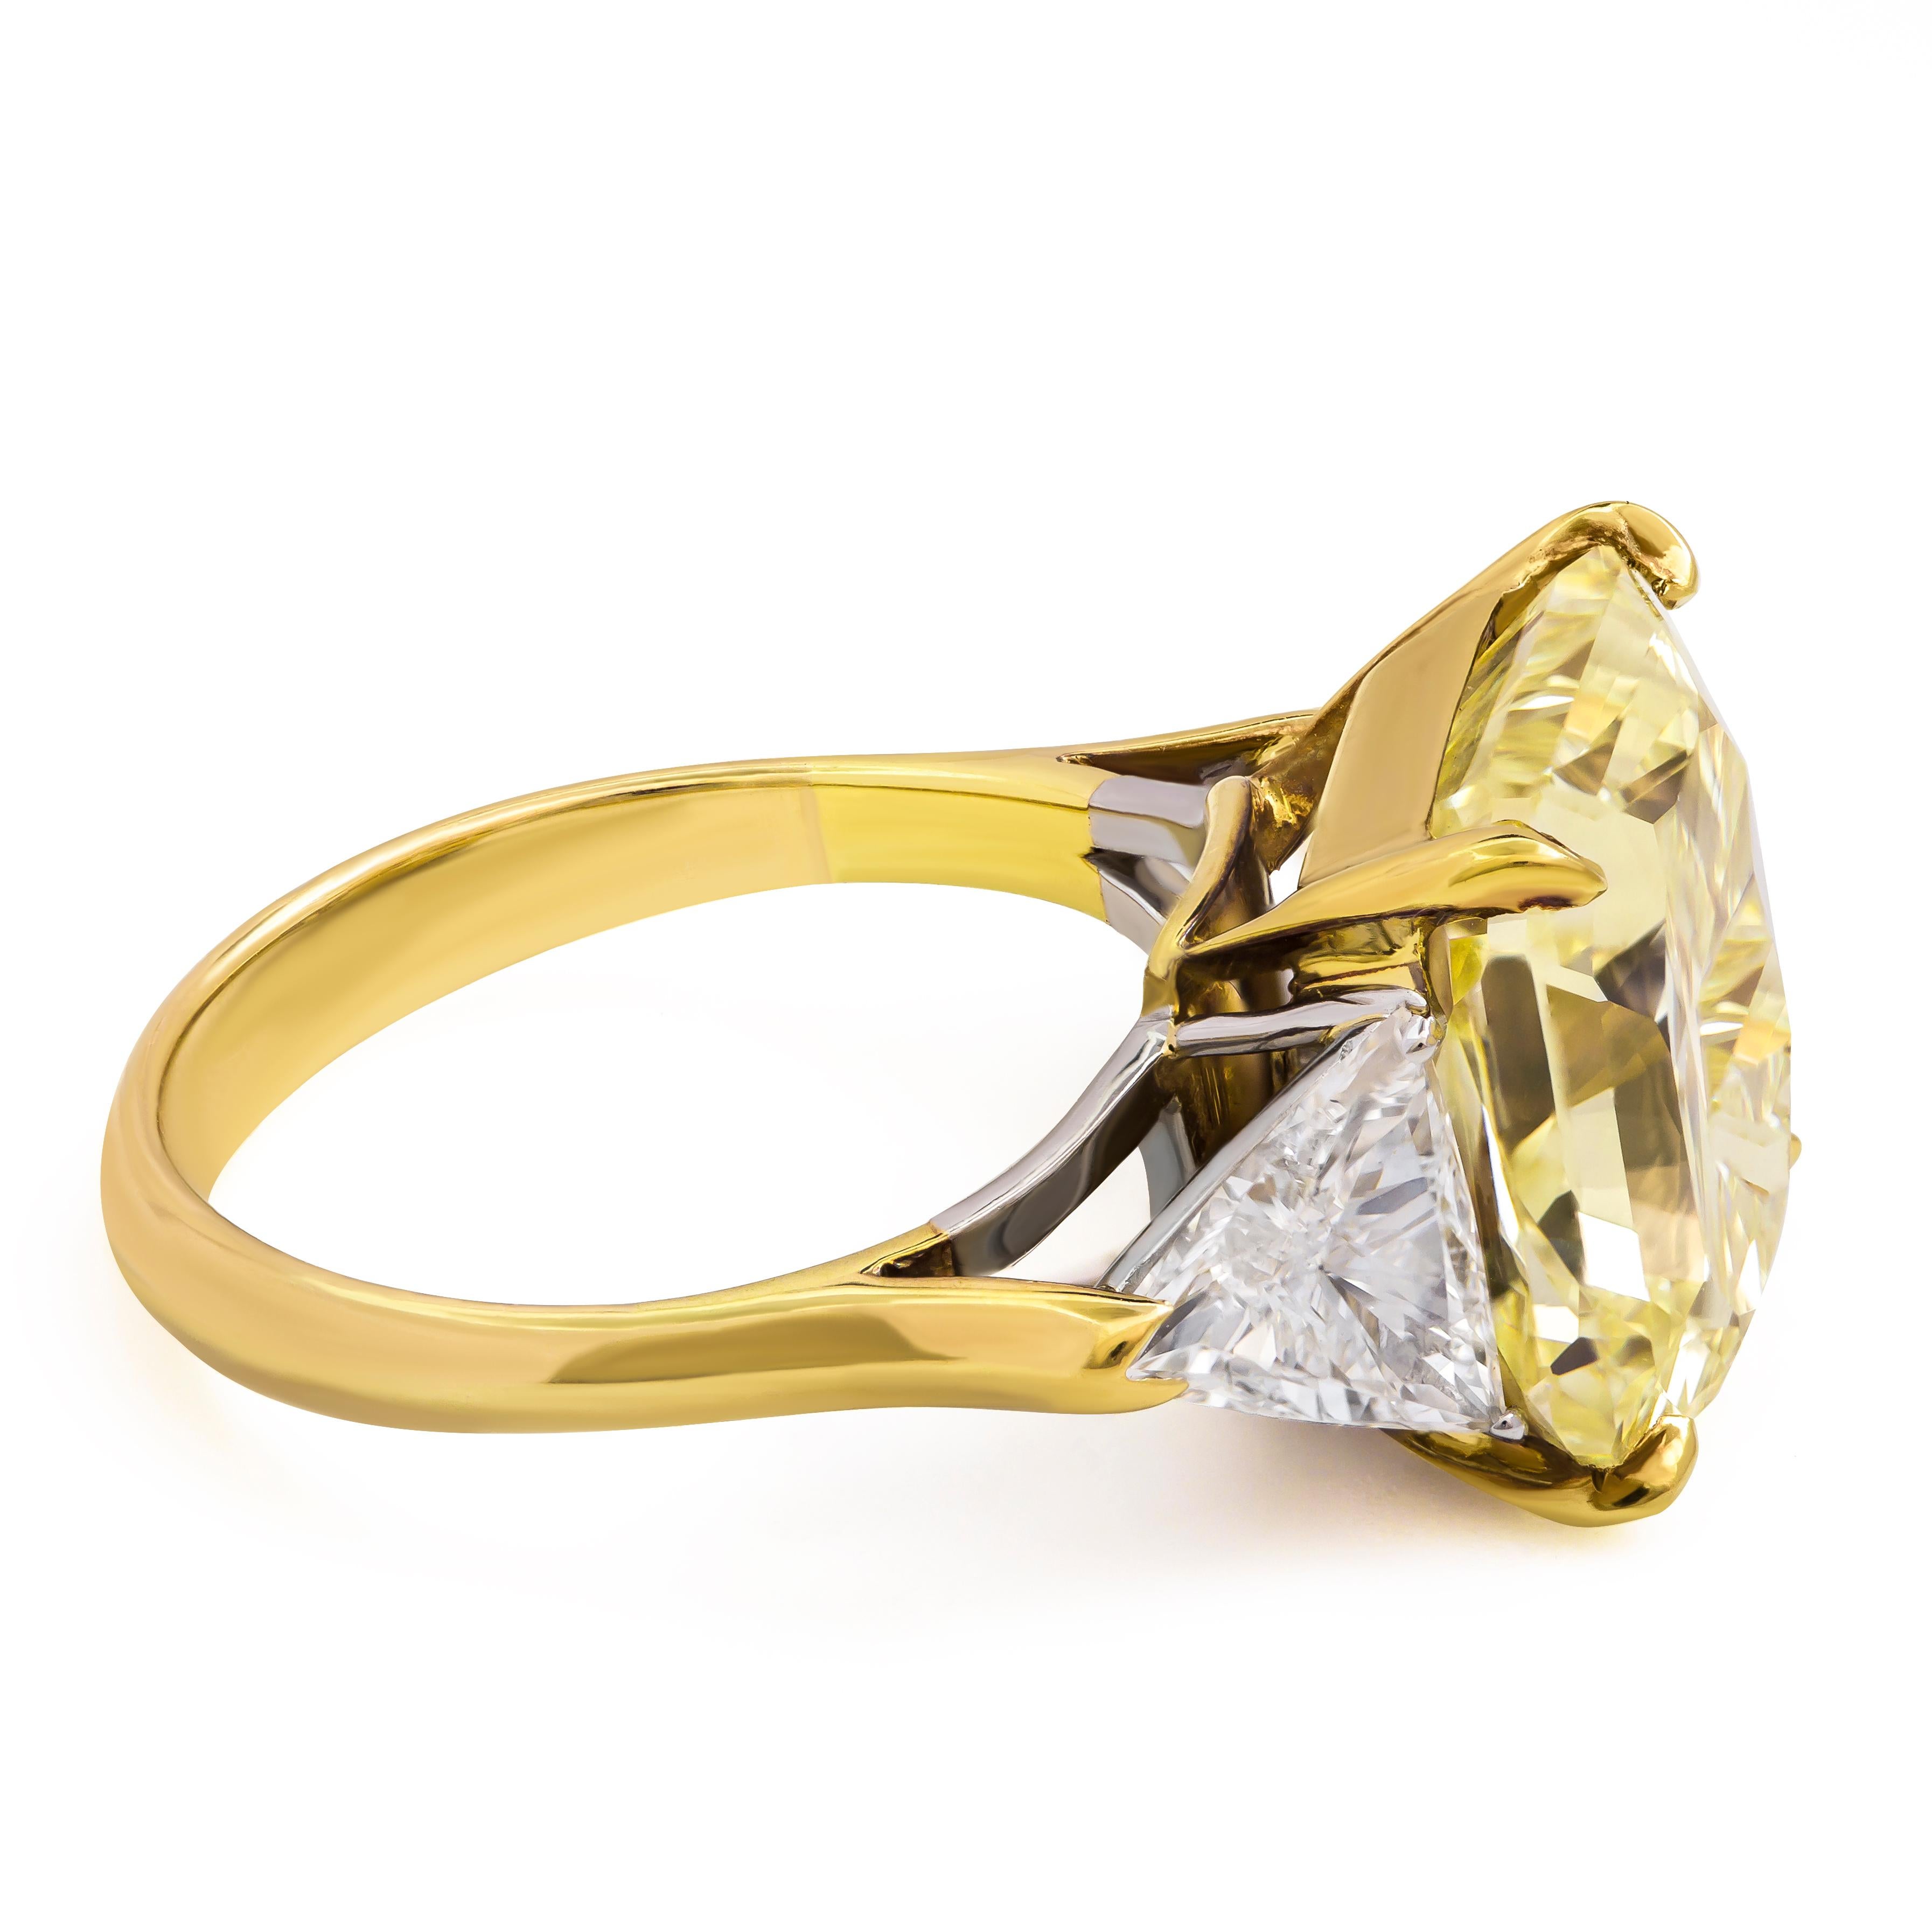 This amazing three-stone engagement ring features a 9.00 carat radiant cut diamond that GIA certified as Fancy Yellow, VS1 clarity. Flanking the center diamond are two brilliant trillion (triangular) diamonds weighing 1.27 carats total. Set in an 18